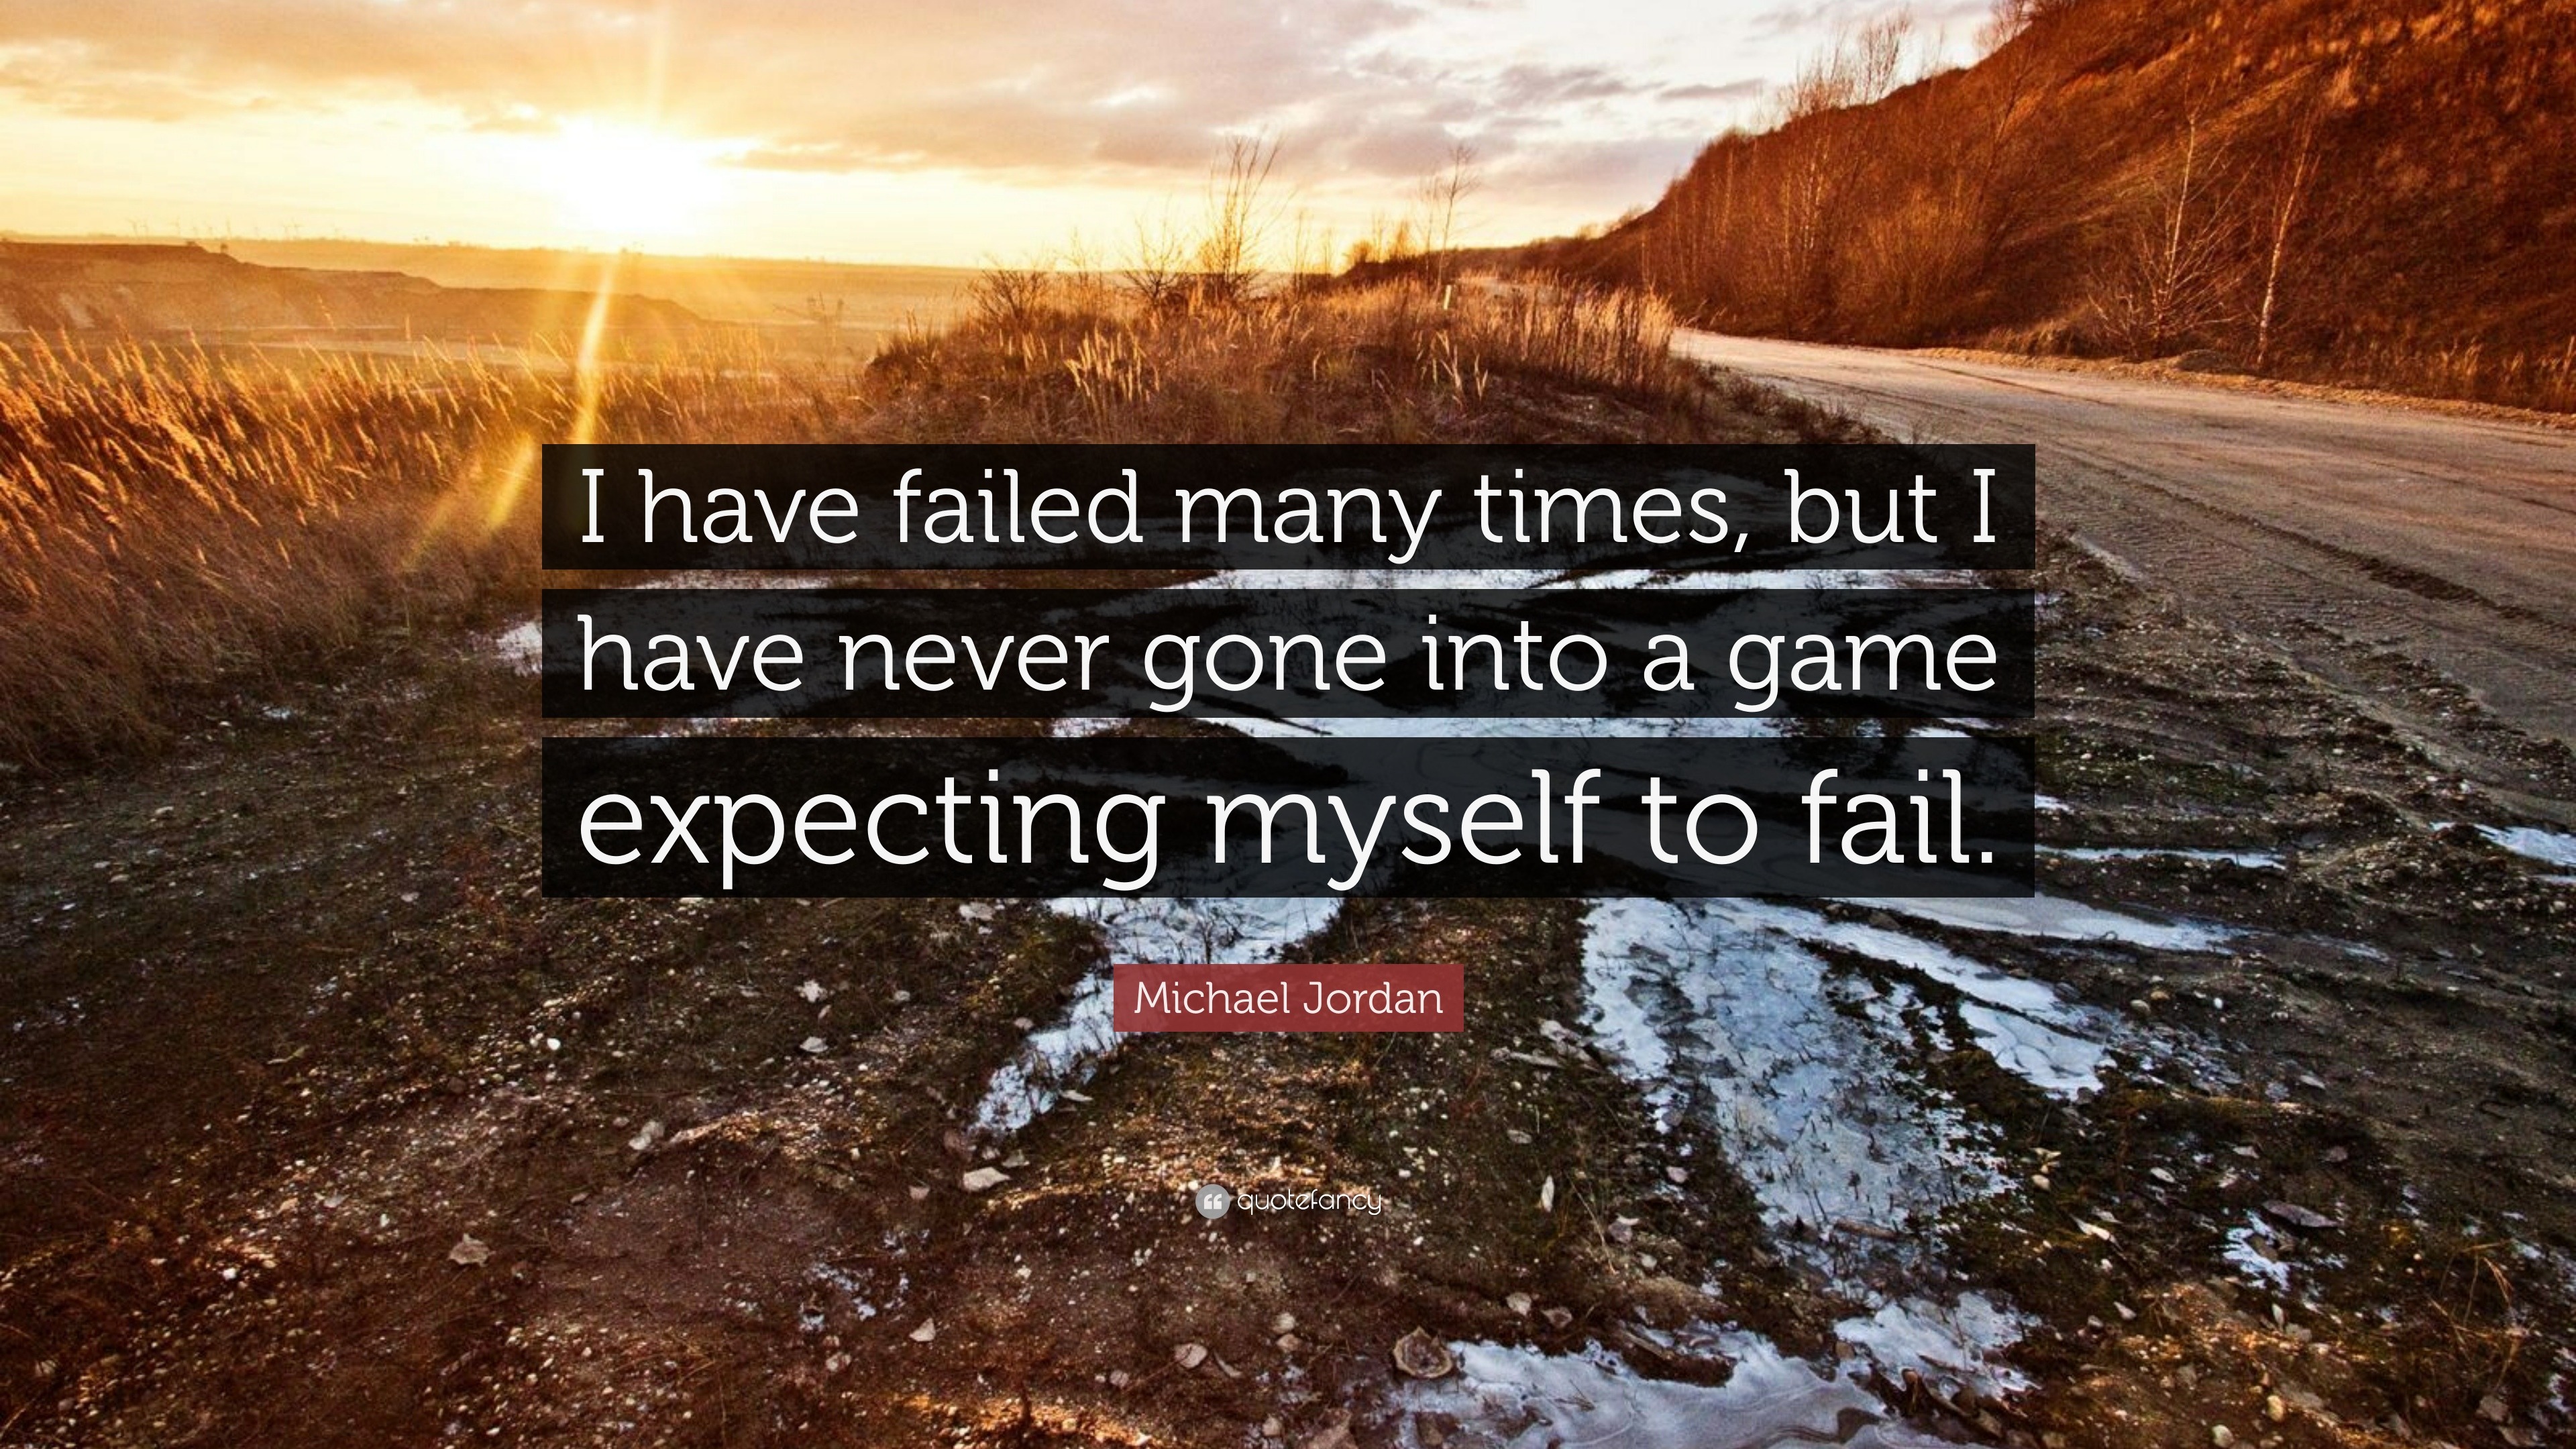 Michael Jordan Quote: “I have failed many times, but I have never gone